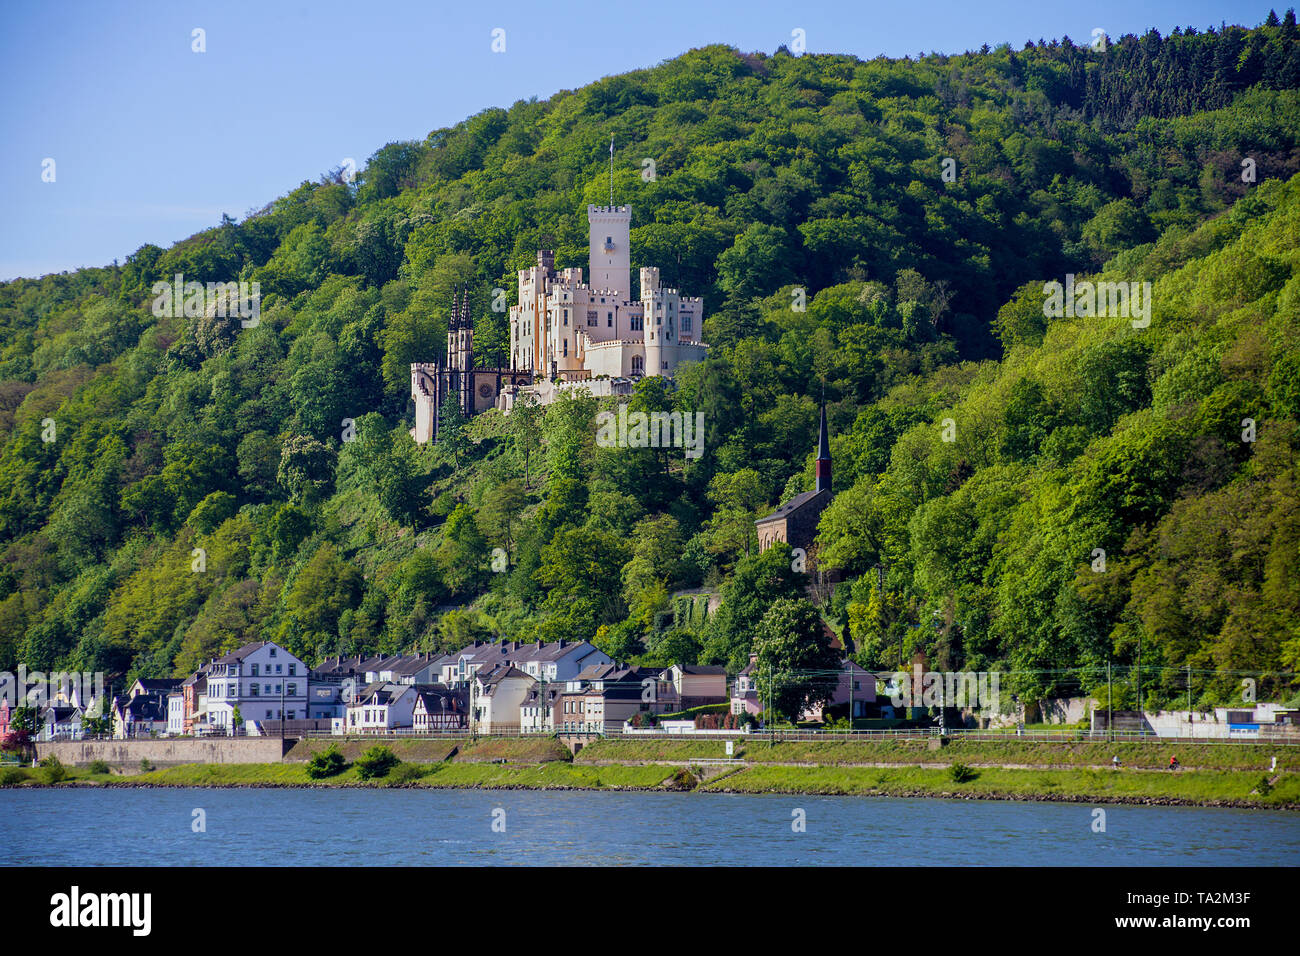 Stolzenfels Castle, Gothic Revival palace at the town Koblenz, Unesco world heritage site, Upper Middle Rhine Valley, Rhineland-Palatinate, Germany Stock Photo